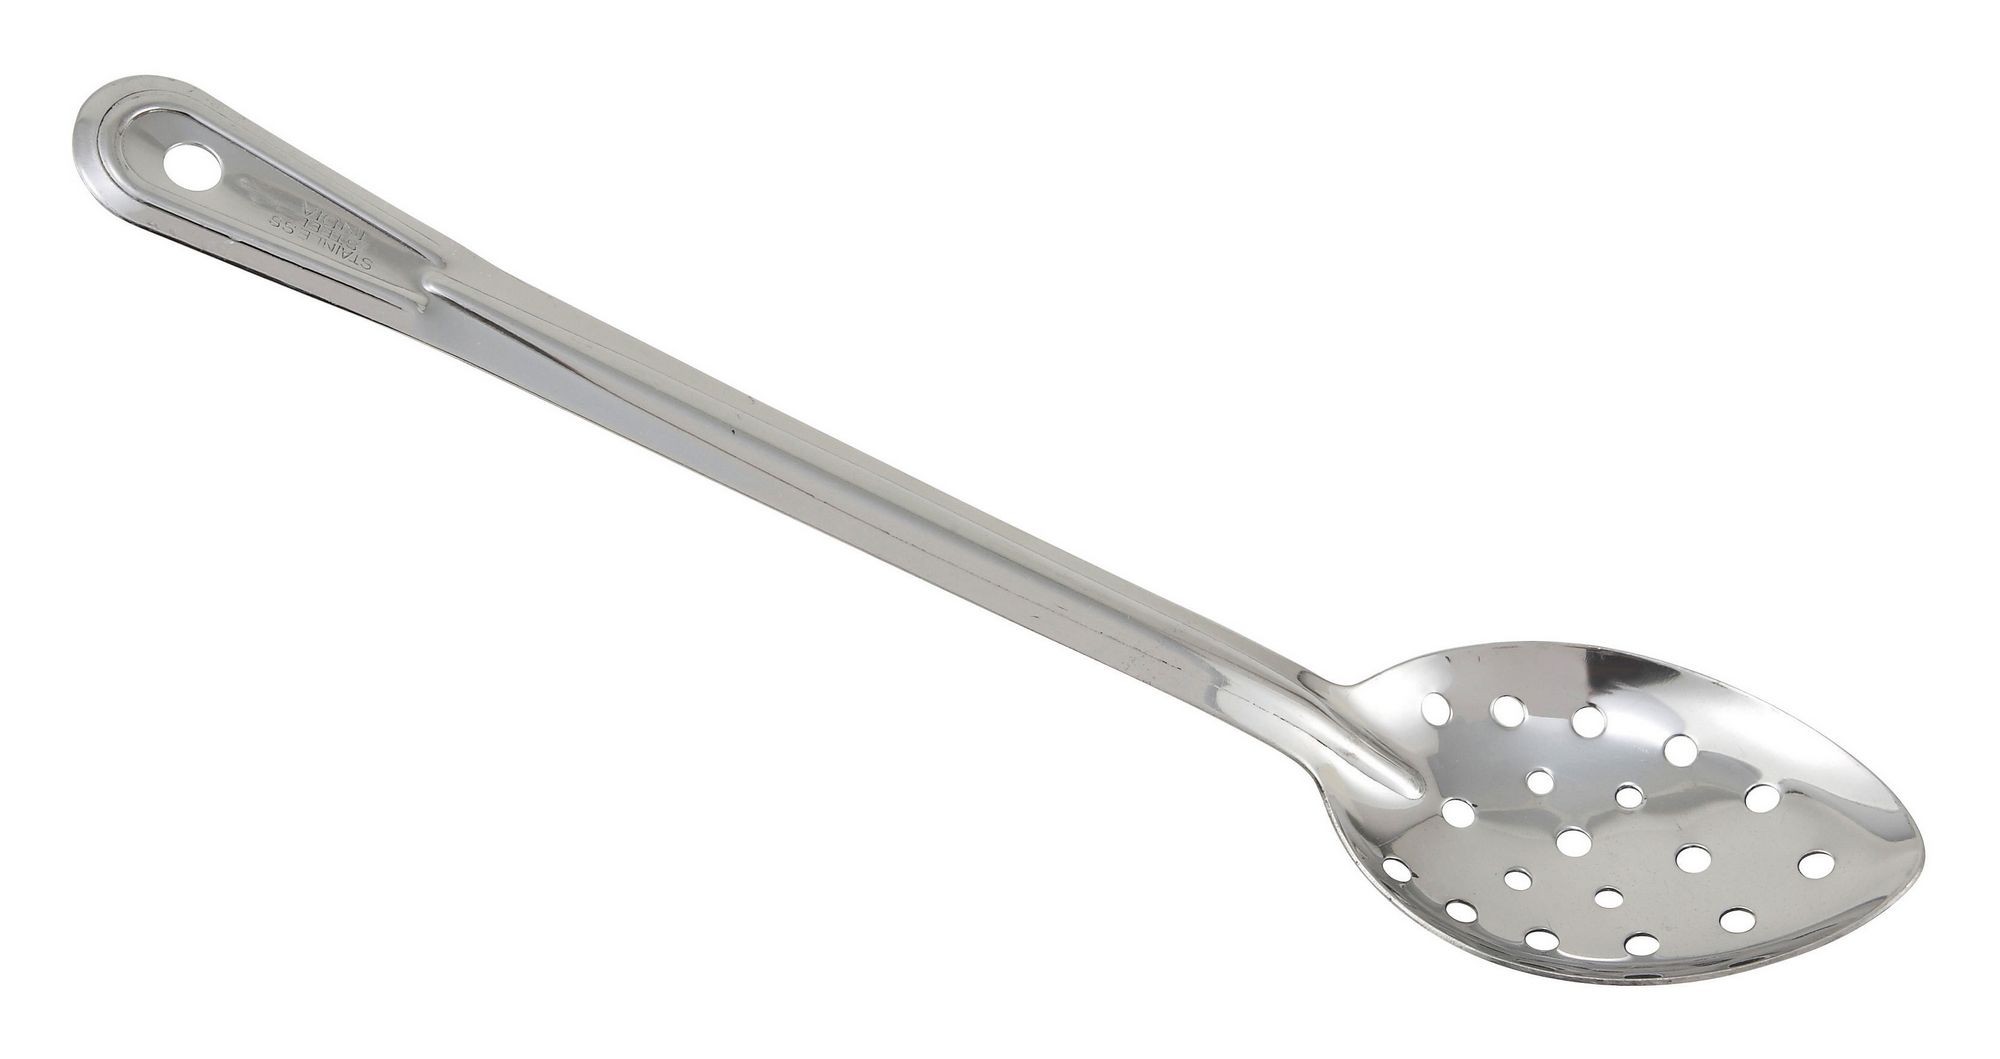 Winco BSPT-13 Perforated Stainless Steel Basting Spoon 13